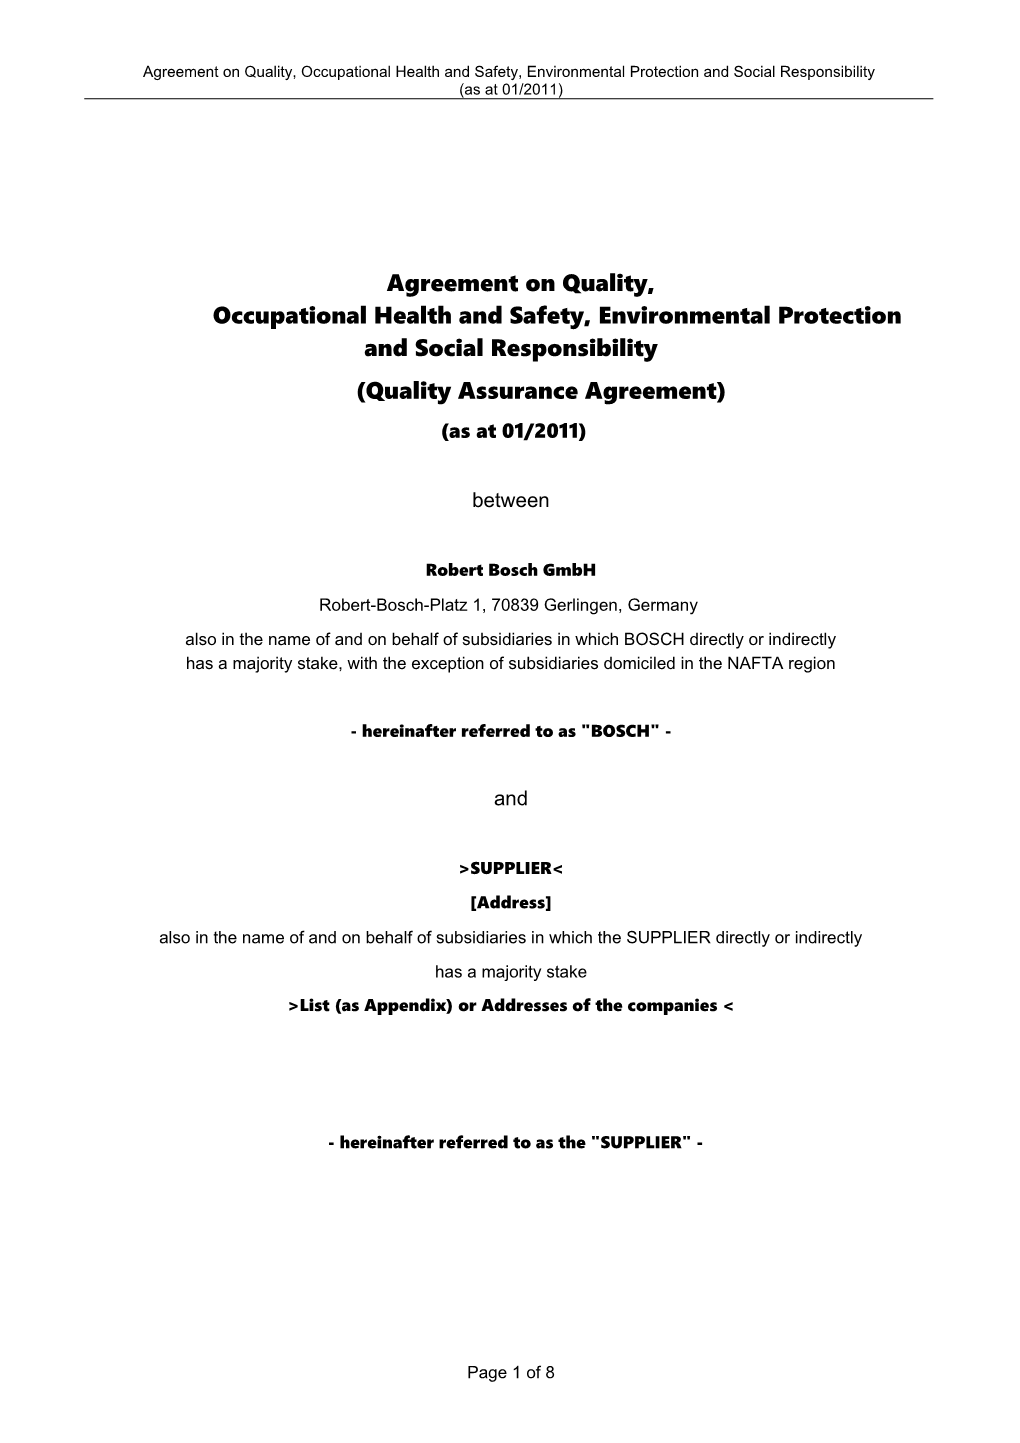 Agreement on Quality, Occupational Health and Safety, Environmental Protection and Social